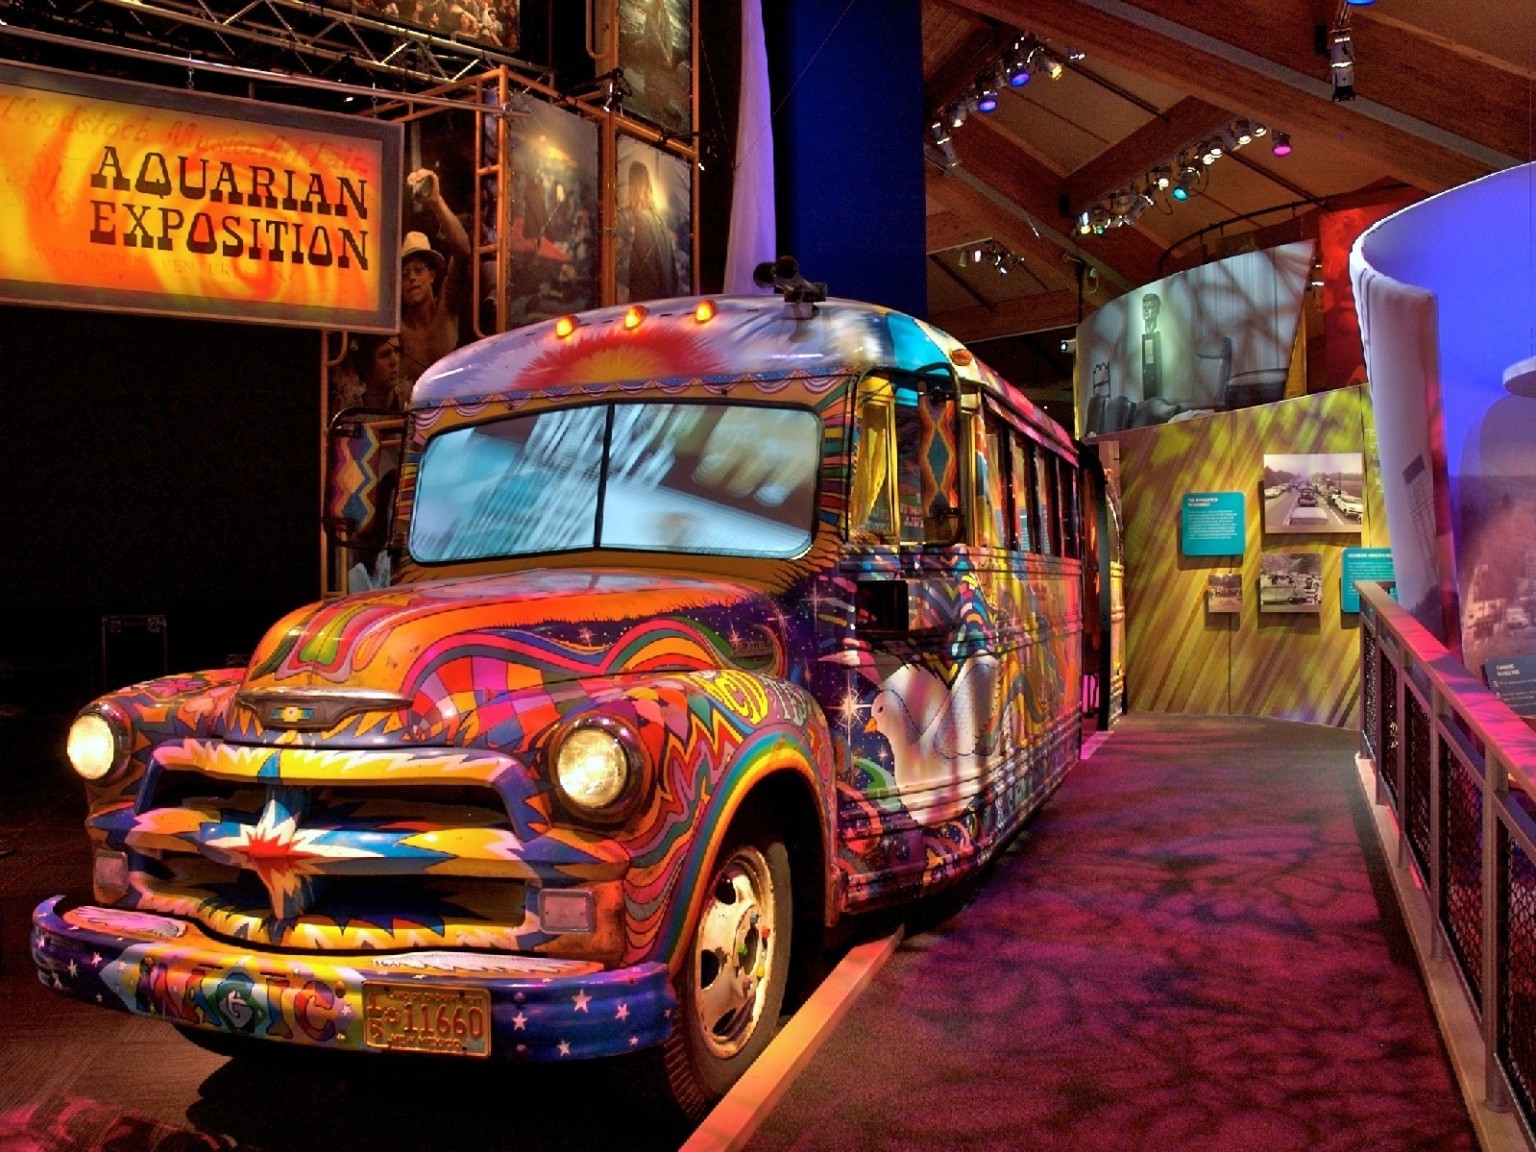 Bus with multicolored abstract painting inside a room with textural colored lighting below a sign reading Aquarian Exposition